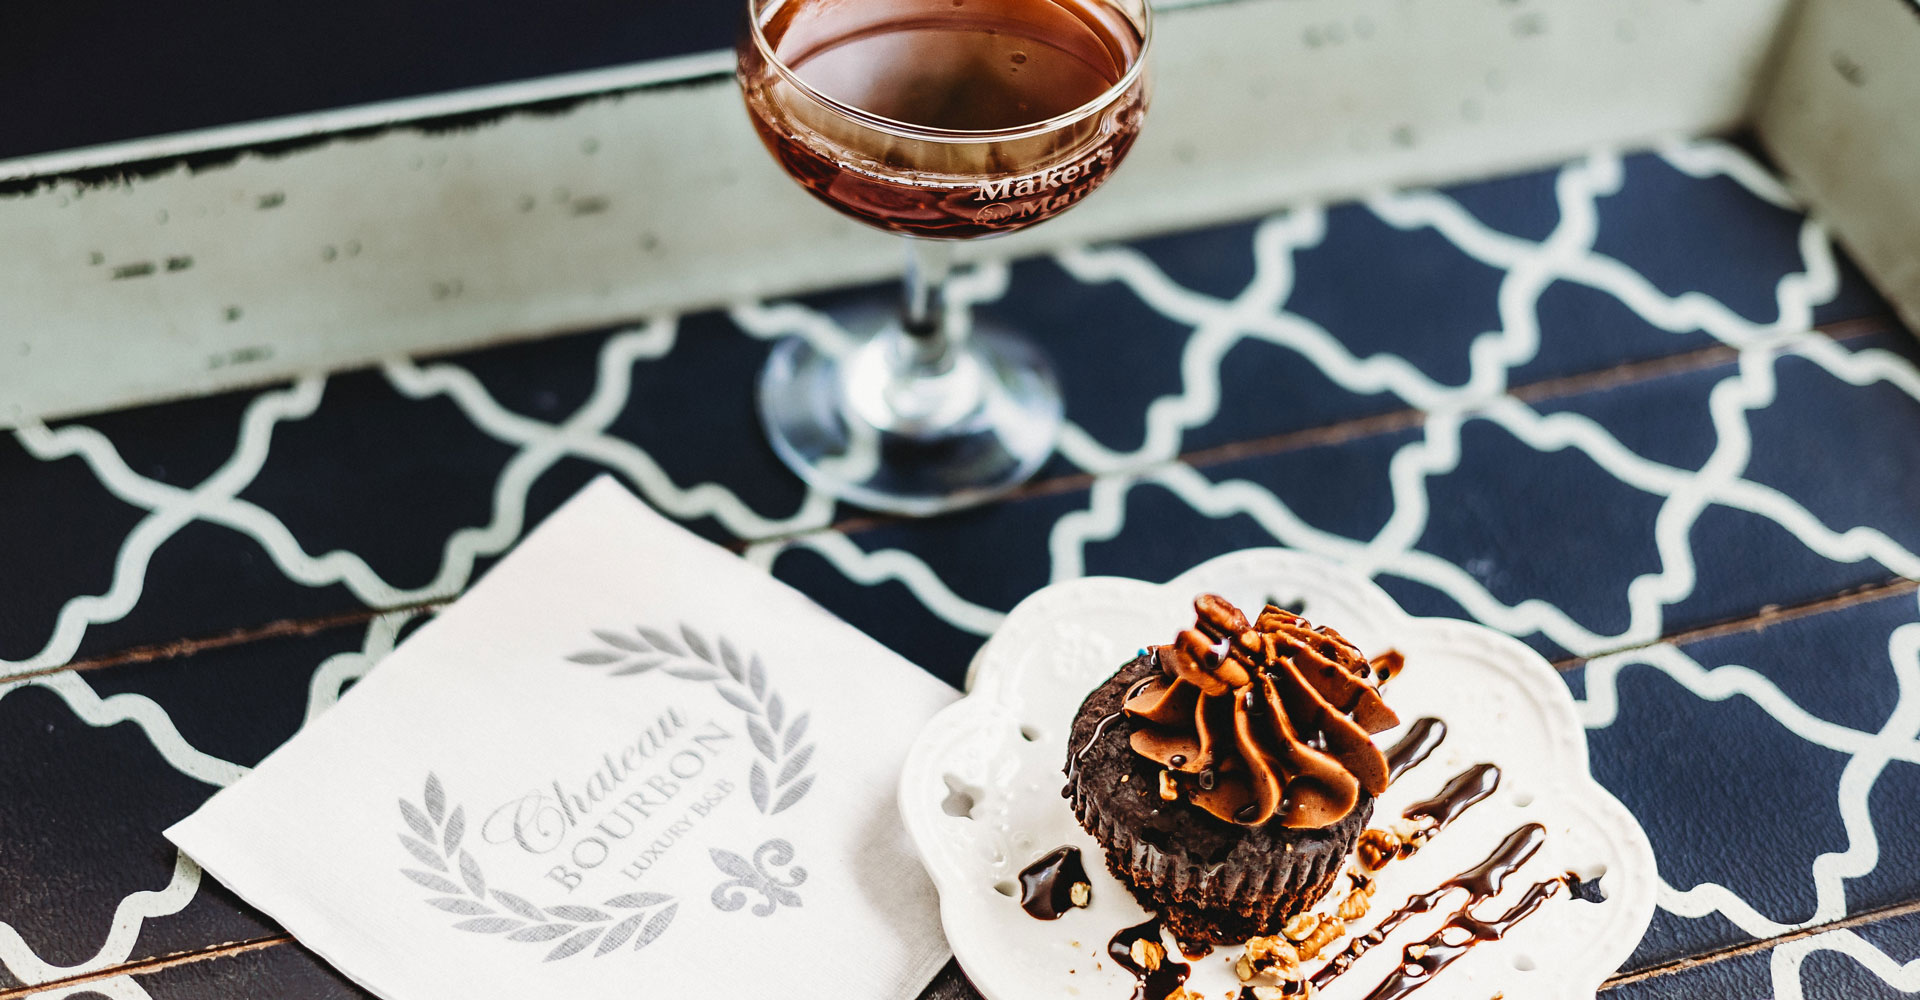 Chateau Bourbon offers a unique bourbon-themed culinary experience, pairing bourbon cocktails with sweet treats.